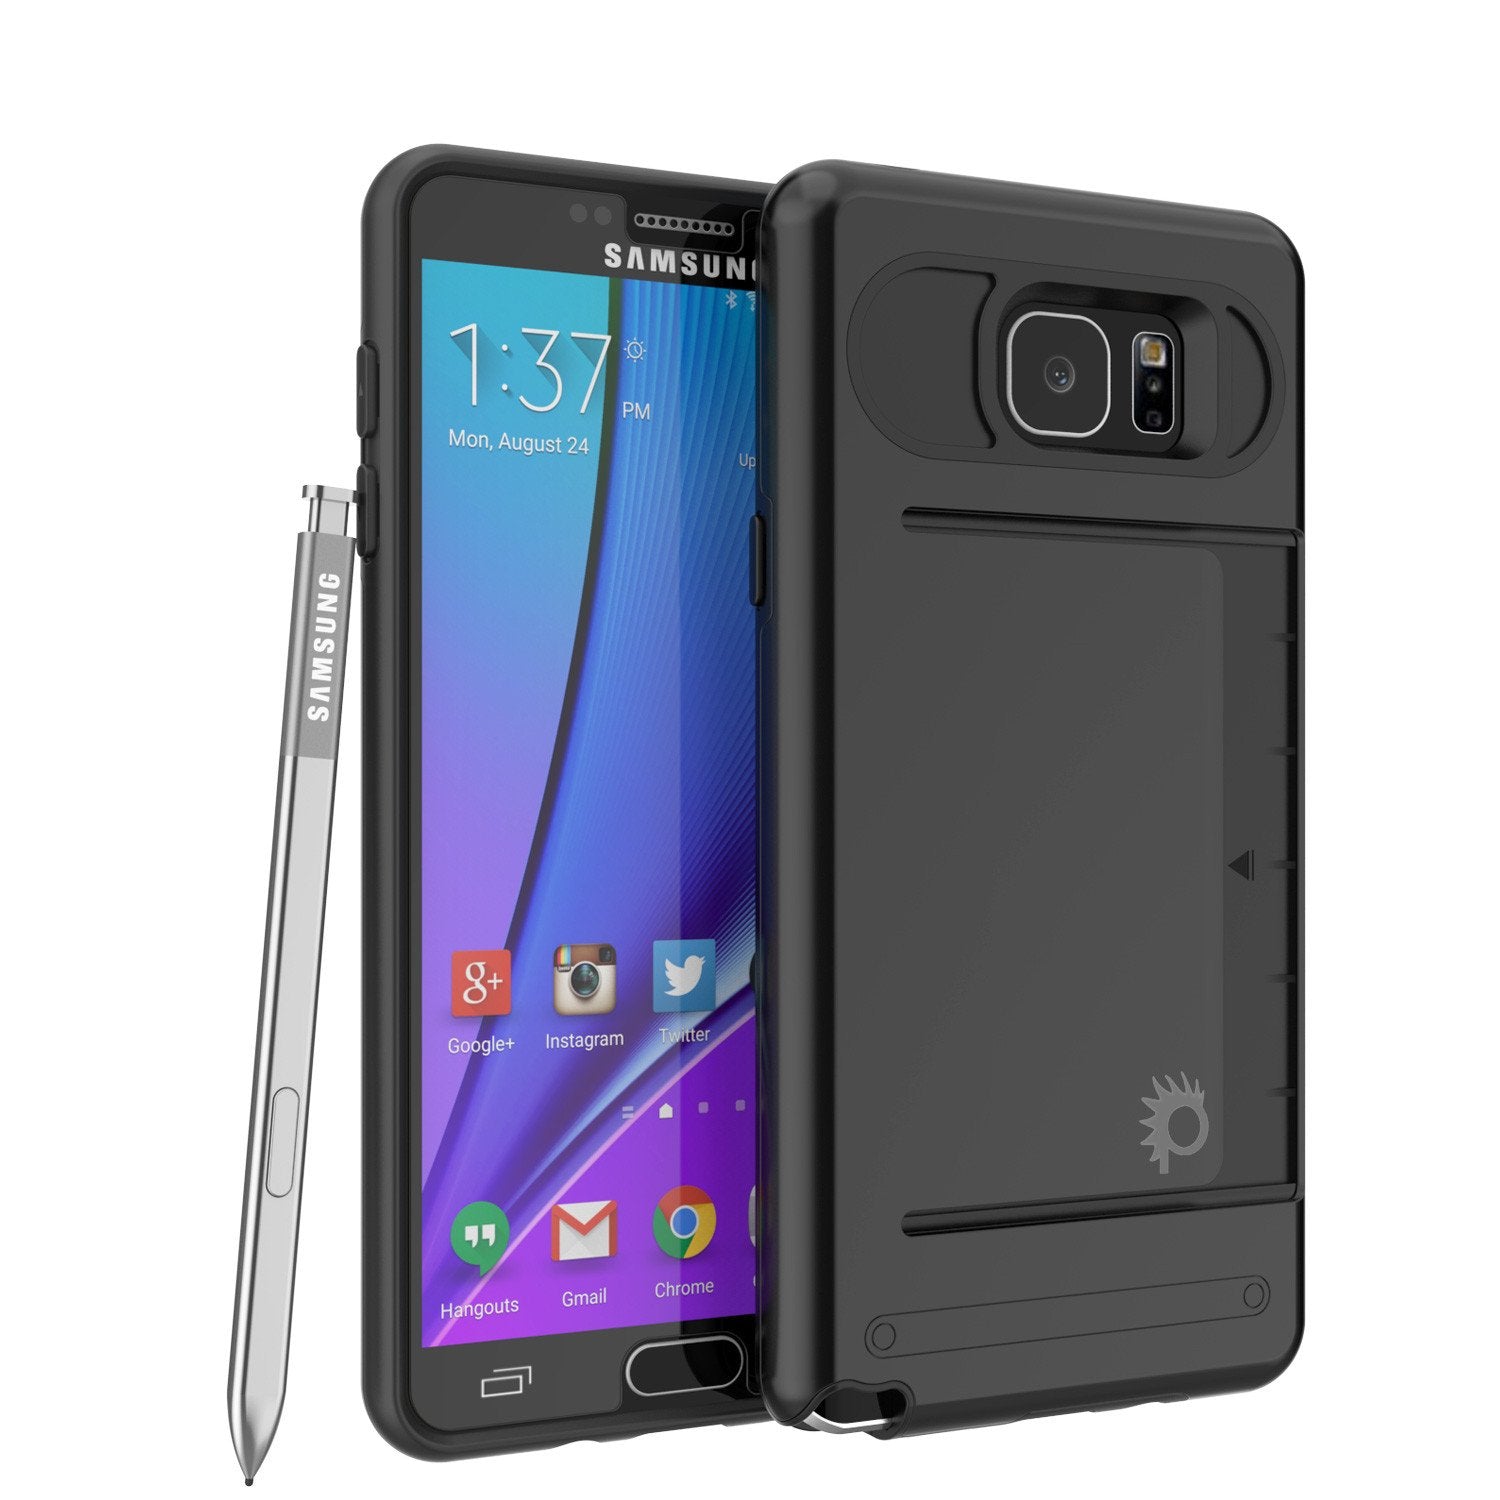 Galaxy Note 5 Case PunkCase CLUTCH Black Series Slim Armor Soft Cover Case w/ Tempered Glass - PunkCase NZ